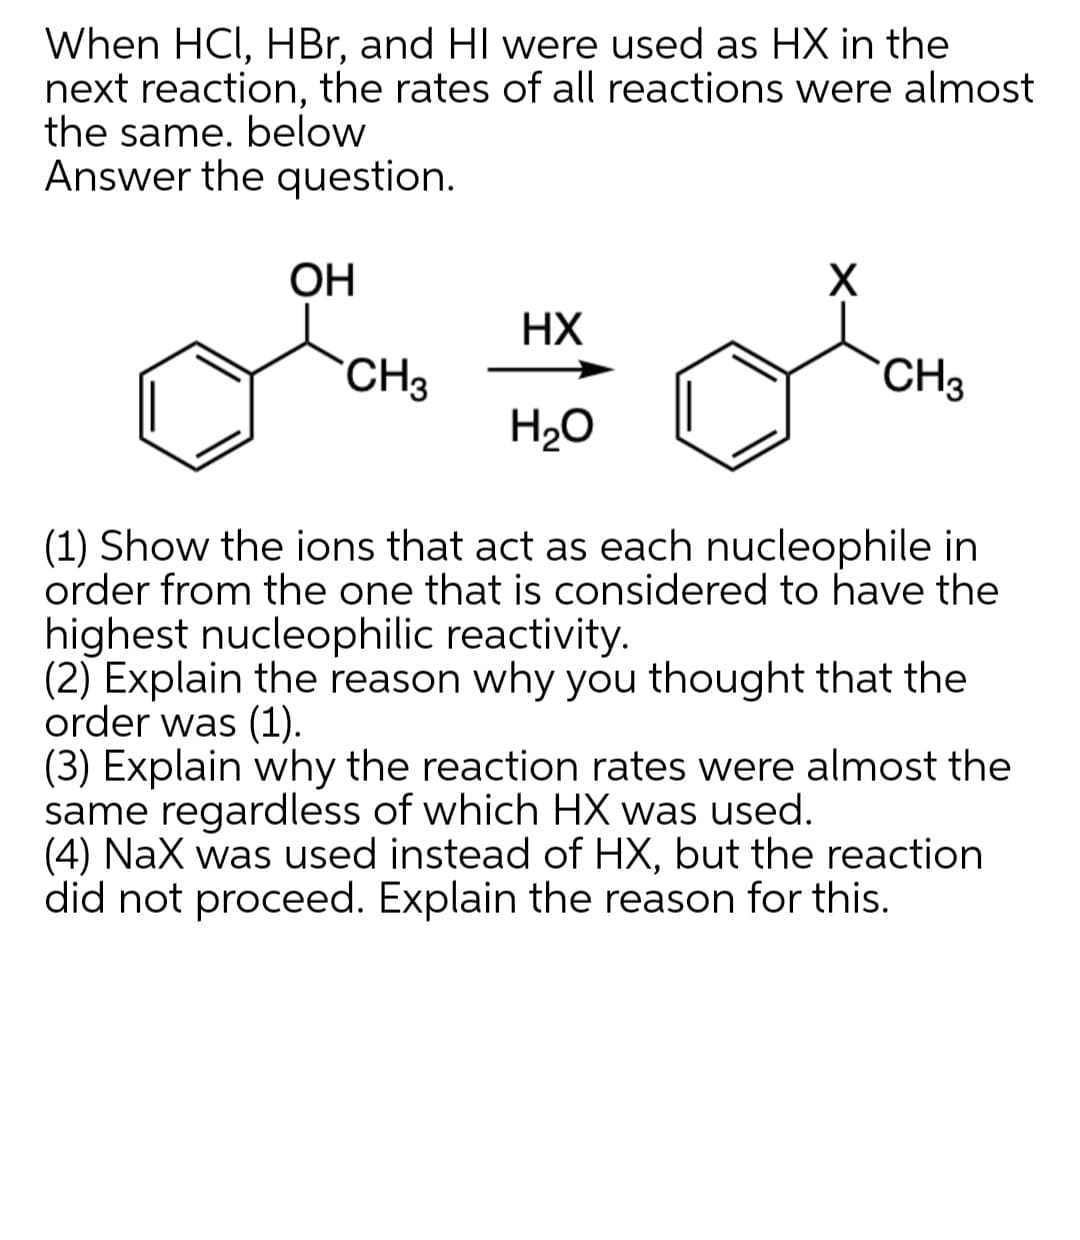 When HCI, HBr, and HI were used as HX in the
next reaction, the rates of all reactions were almost
the same. below
Answer the question.
OH
HX
CH3
CH3
H2O
(1) Show the ions that act as each nucleophile in
order from the one that is considered to have the
highest nucleophilic reactivity.
(2) Explain the reason why you thought that the
order was (1).
(3) Explain why the reaction rates were almost the
same regardless of which HX was used.
(4) Nax was used instead of HX, but the reaction
did not proceed. Explain the reason for this.
